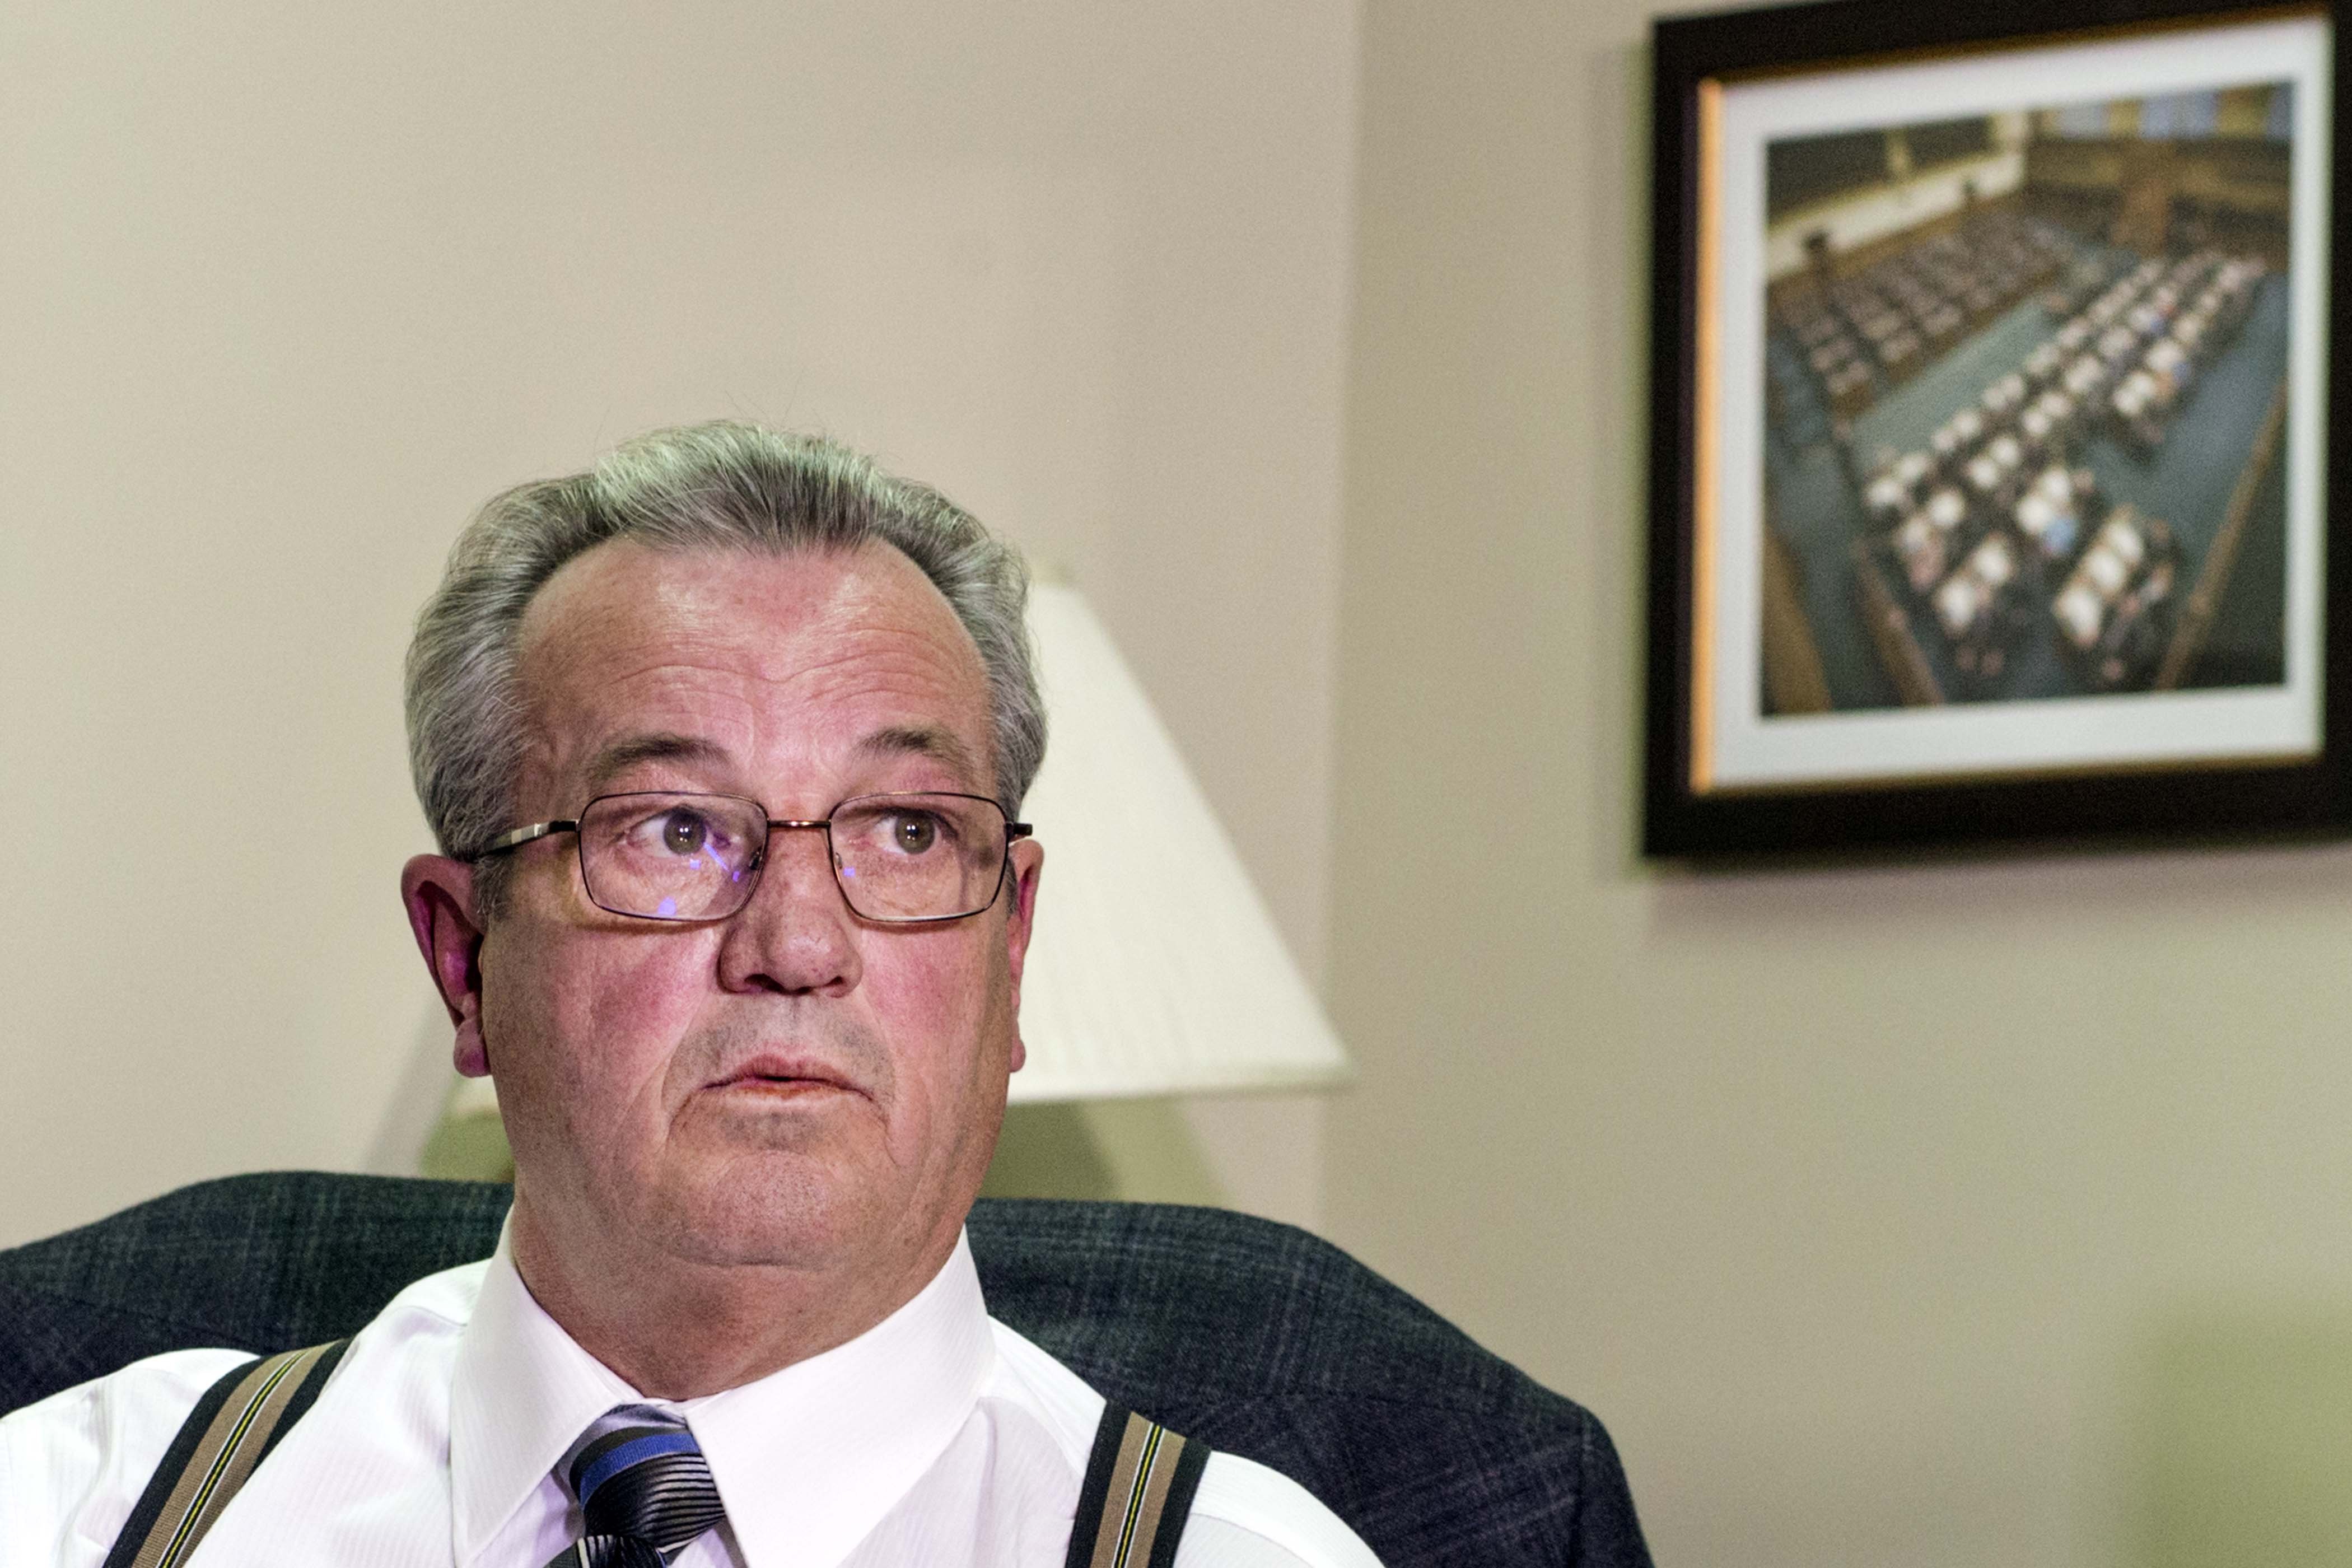 Constituents say Randy Hillier added them to anti-lockdown mailing lists without consent